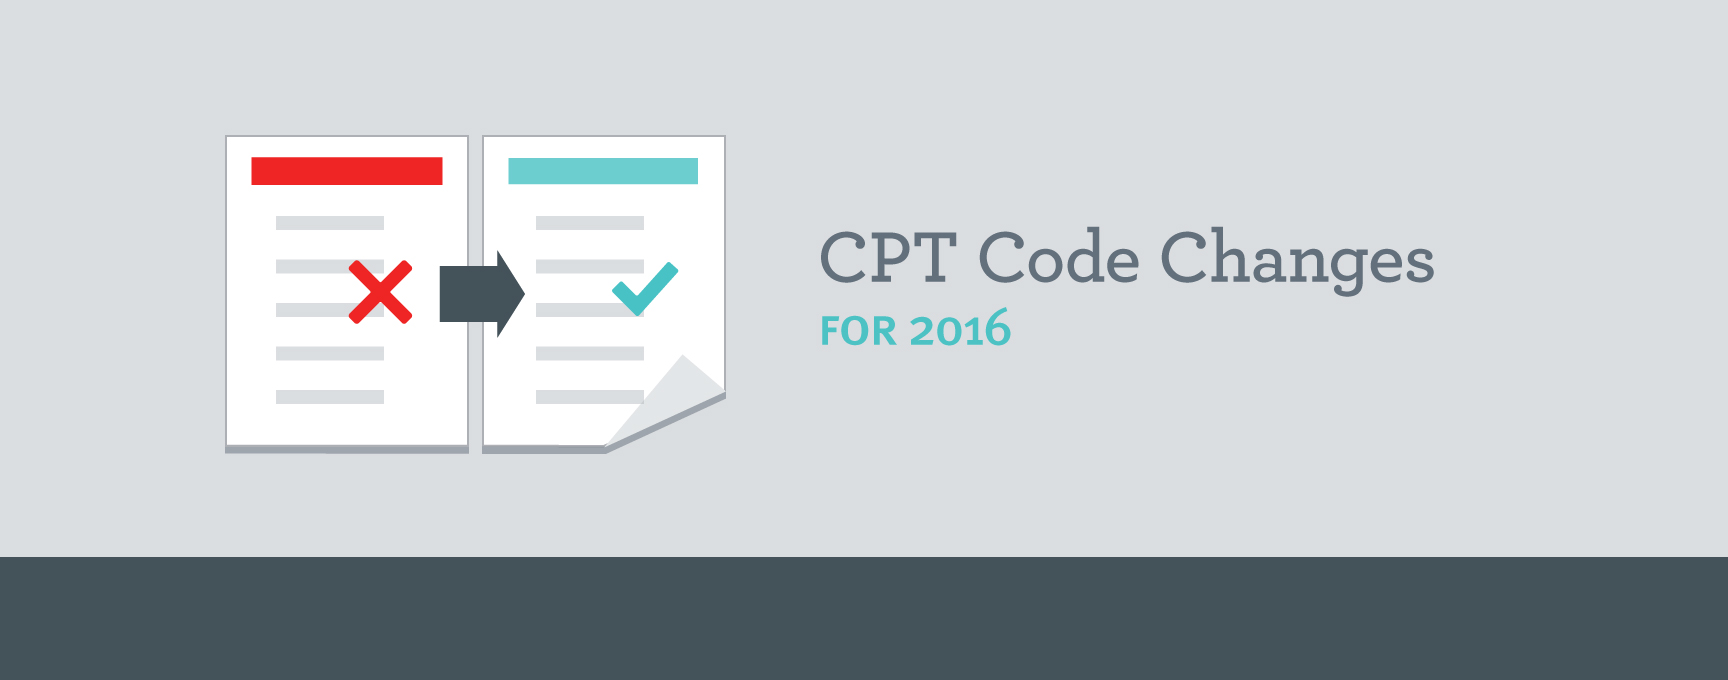 CPT code changes for 2016